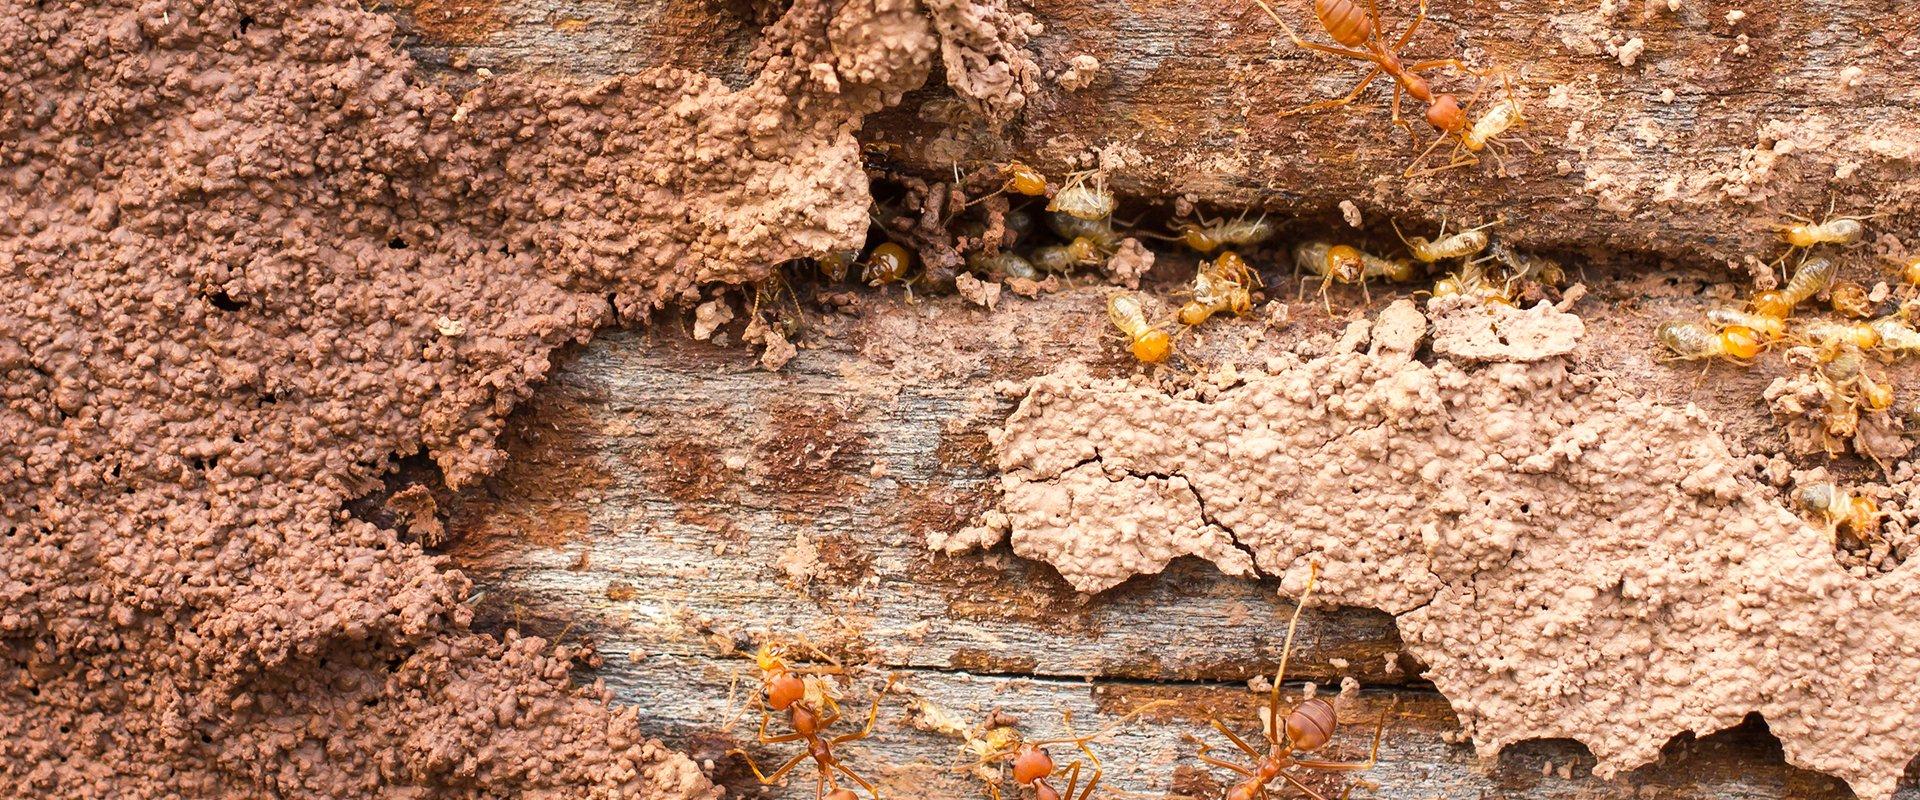 termites and red ants together on wood